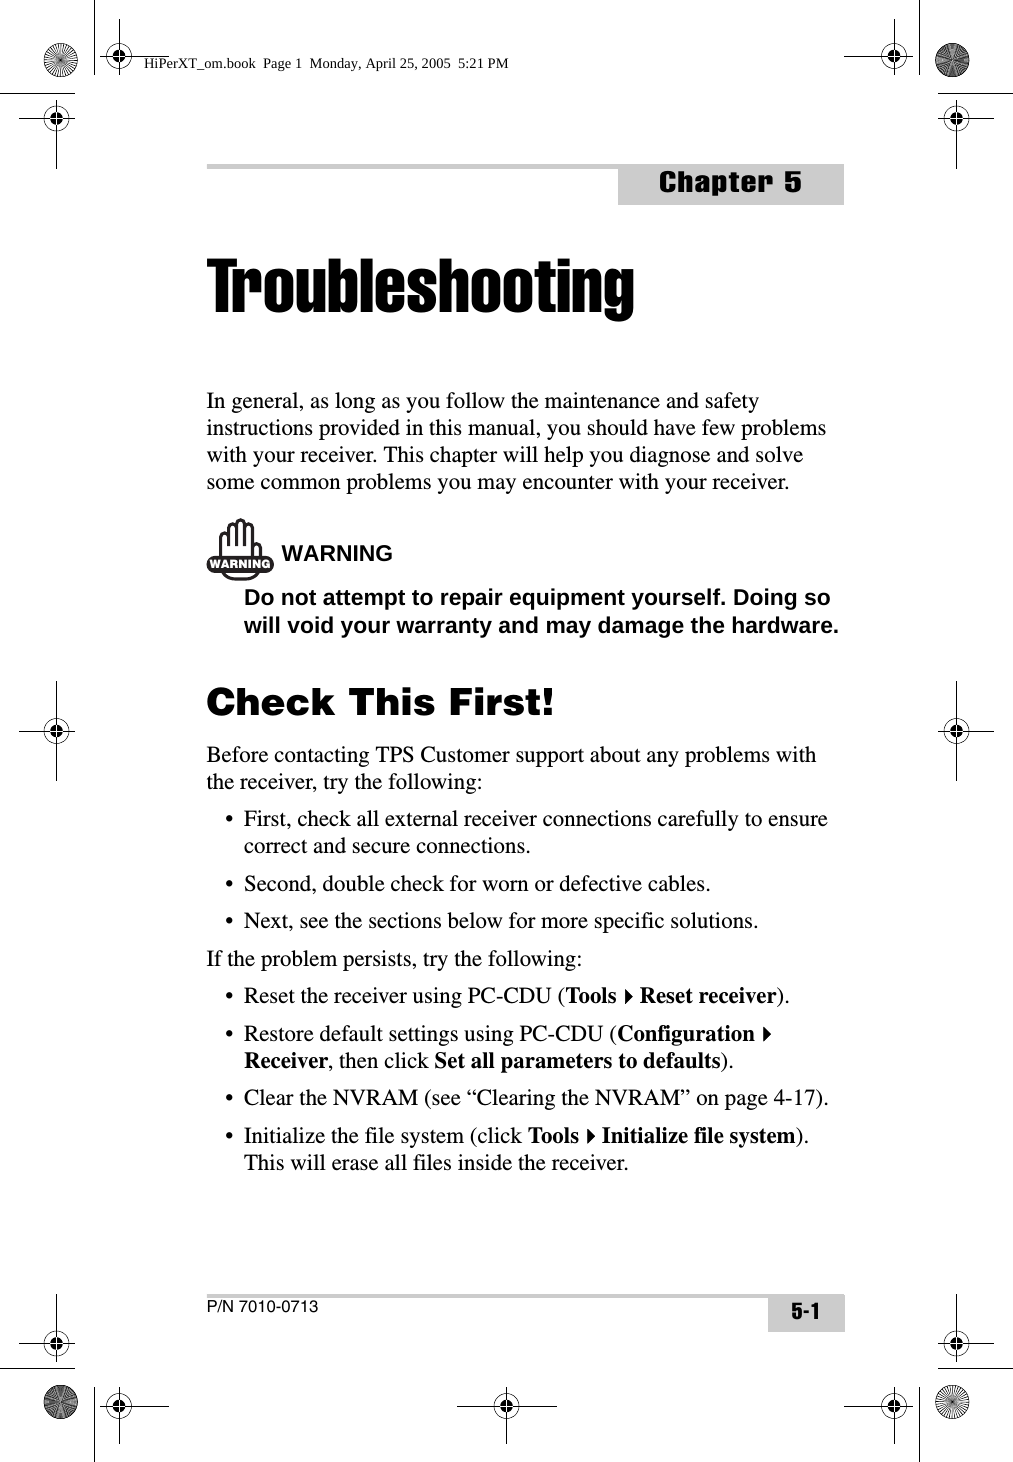 P/N 7010-0713Chapter 55-1TroubleshootingIn general, as long as you follow the maintenance and safety instructions provided in this manual, you should have few problems with your receiver. This chapter will help you diagnose and solve some common problems you may encounter with your receiver.WARNINGWARNINGDo not attempt to repair equipment yourself. Doing so will void your warranty and may damage the hardware.Check This First!Before contacting TPS Customer support about any problems with the receiver, try the following:• First, check all external receiver connections carefully to ensure correct and secure connections.• Second, double check for worn or defective cables.• Next, see the sections below for more specific solutions.If the problem persists, try the following:• Reset the receiver using PC-CDU (ToolsReset receiver).• Restore default settings using PC-CDU (ConfigurationReceiver, then click Set all parameters to defaults).• Clear the NVRAM (see “Clearing the NVRAM” on page 4-17).• Initialize the file system (click ToolsInitialize file system). This will erase all files inside the receiver.HiPerXT_om.book  Page 1  Monday, April 25, 2005  5:21 PM